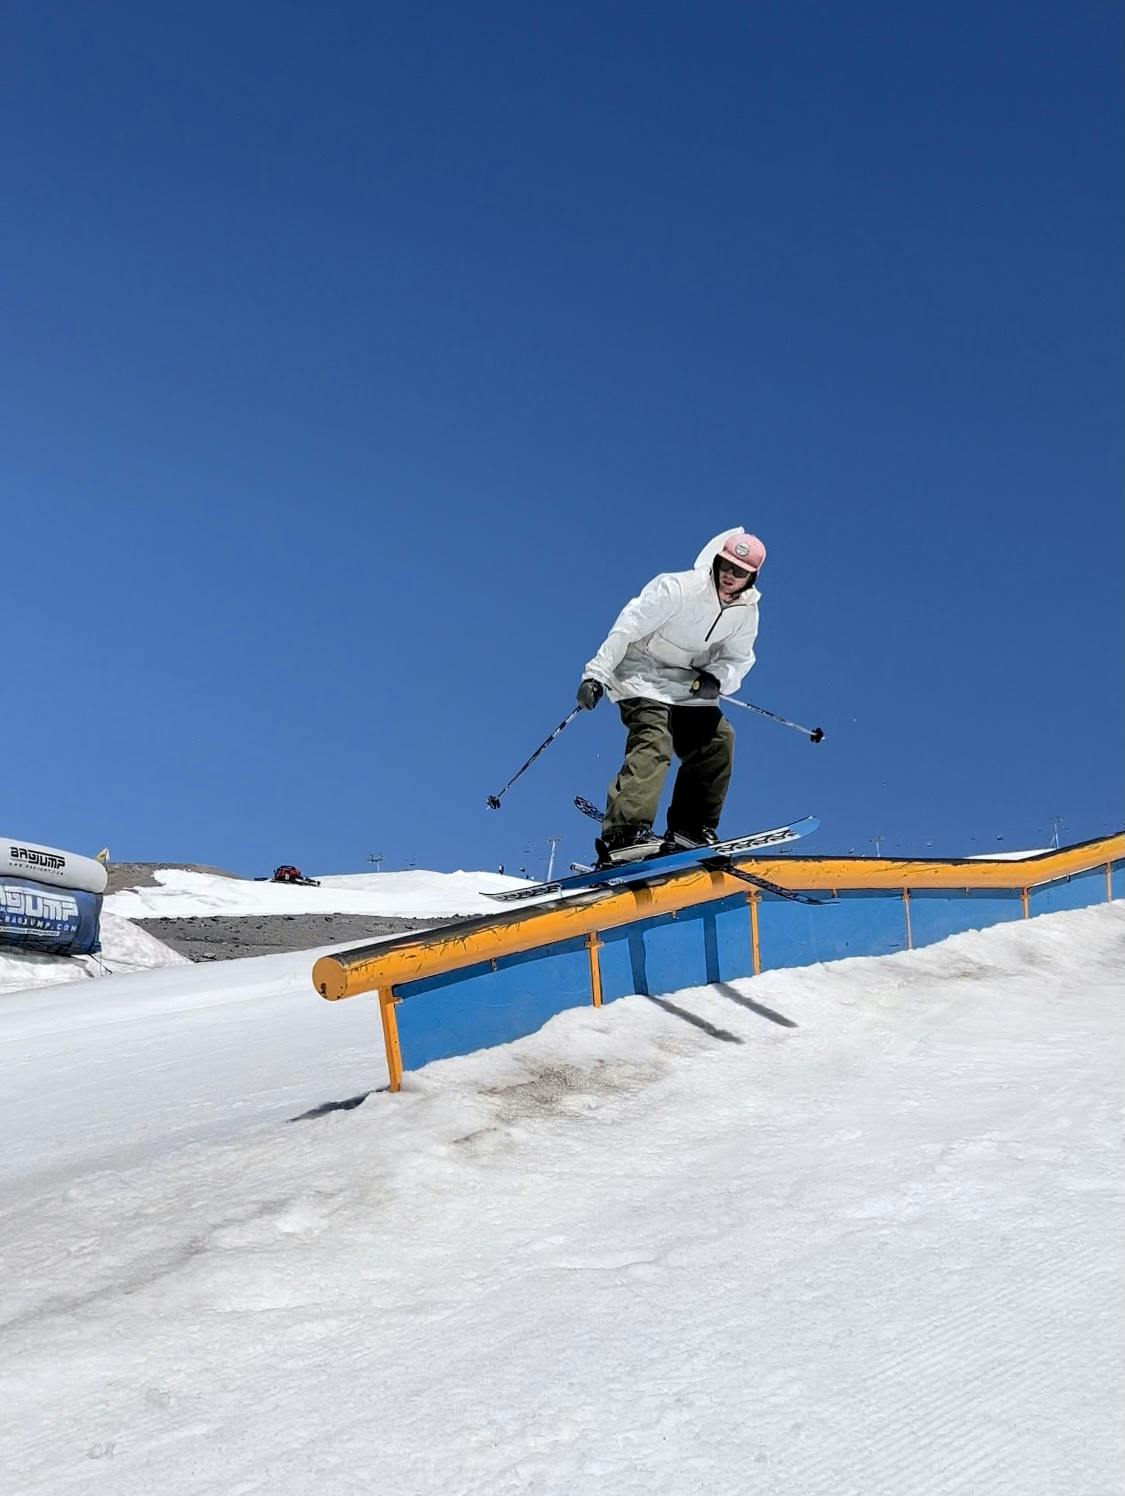 A skier hits a rail feature on skis. 